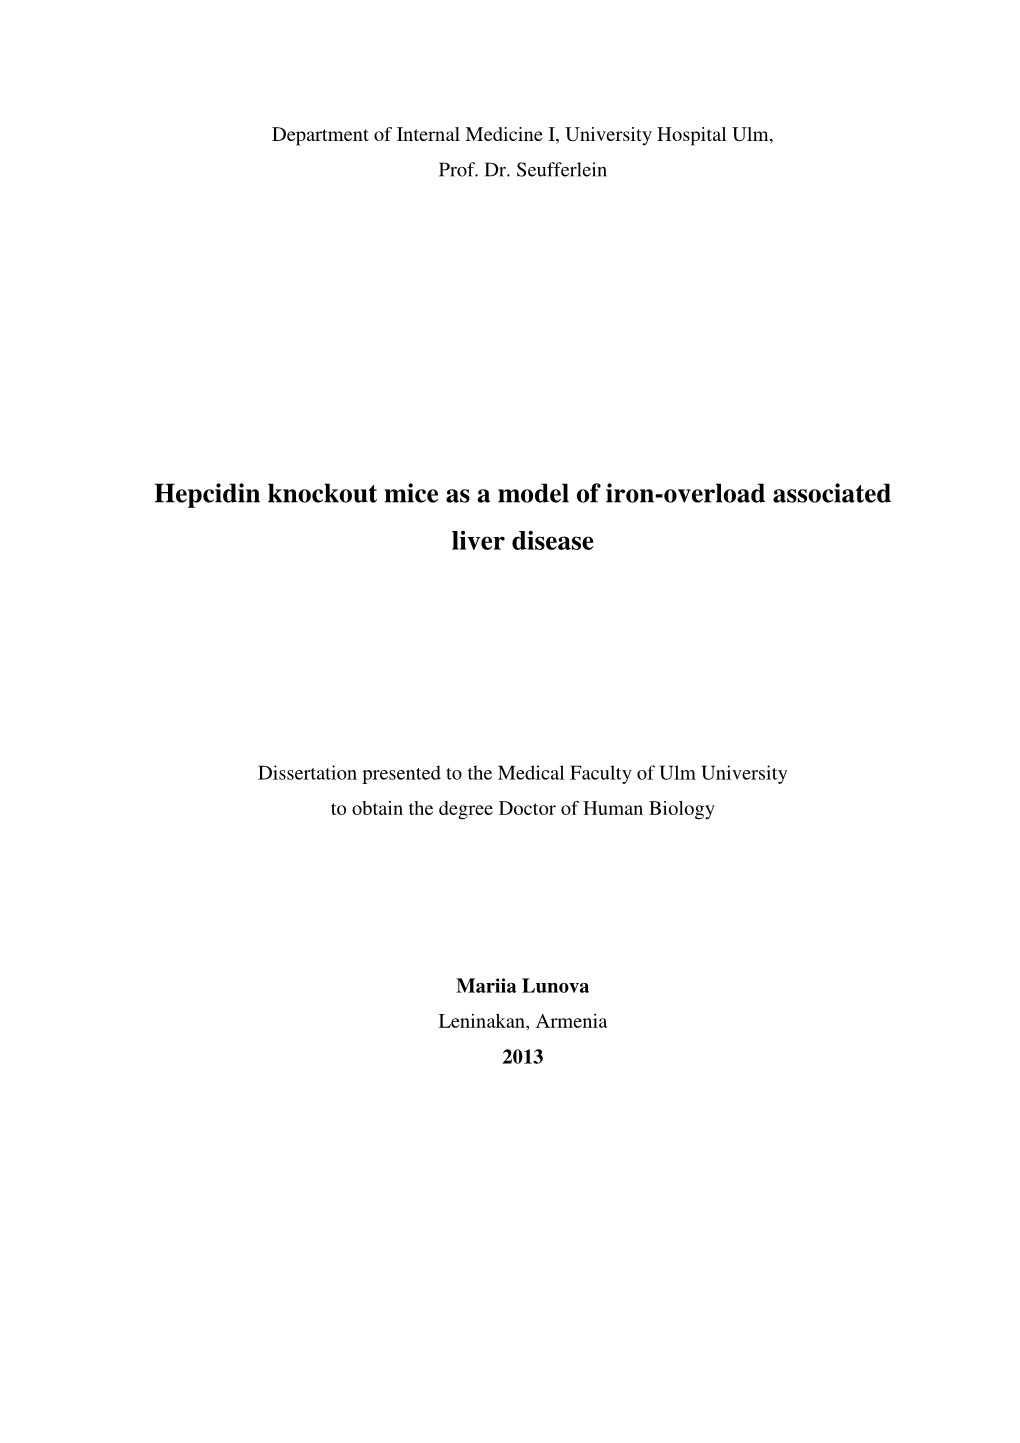 Hepcidin Knockout Mice As a Model of Iron-Overload Associated Liver Disease